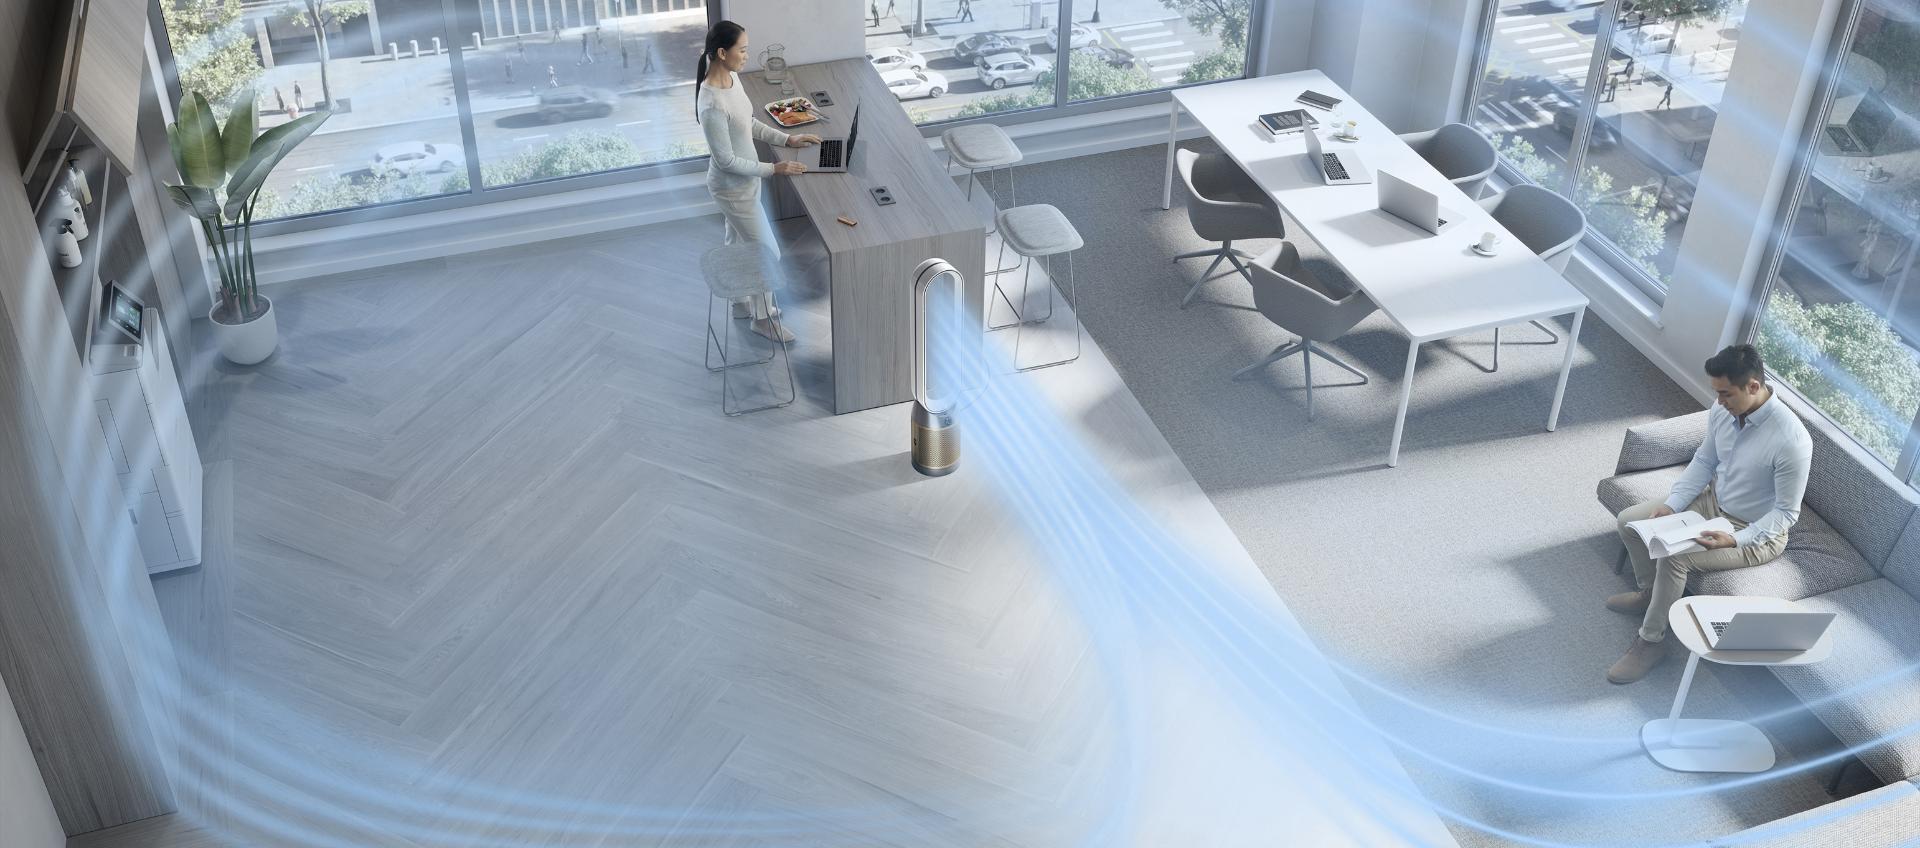 Dyson HEPA Cool Formaldehyde tower fan projecting purified air around an open-plan office